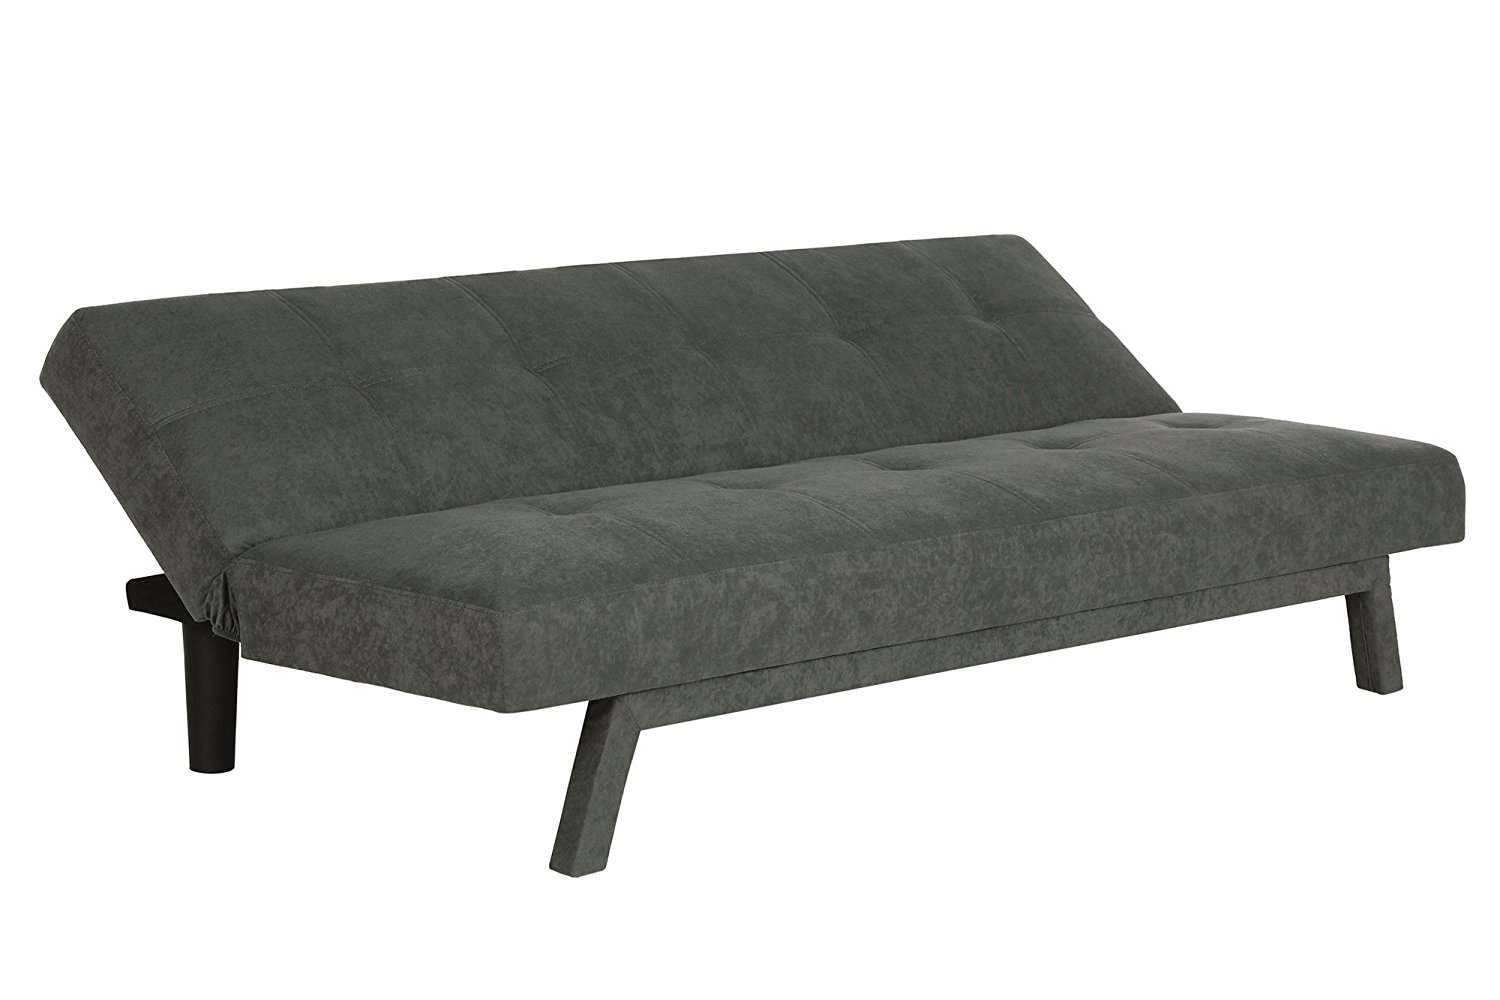 Premium Austin Convertible Sofa Sleeper Futon, Rich Gray Microfiber Couch Bed w/ Upholstered Front Legs, Perfect Small Space Solution, Modern Design, Sturdy 600 lbs. Weight Limit